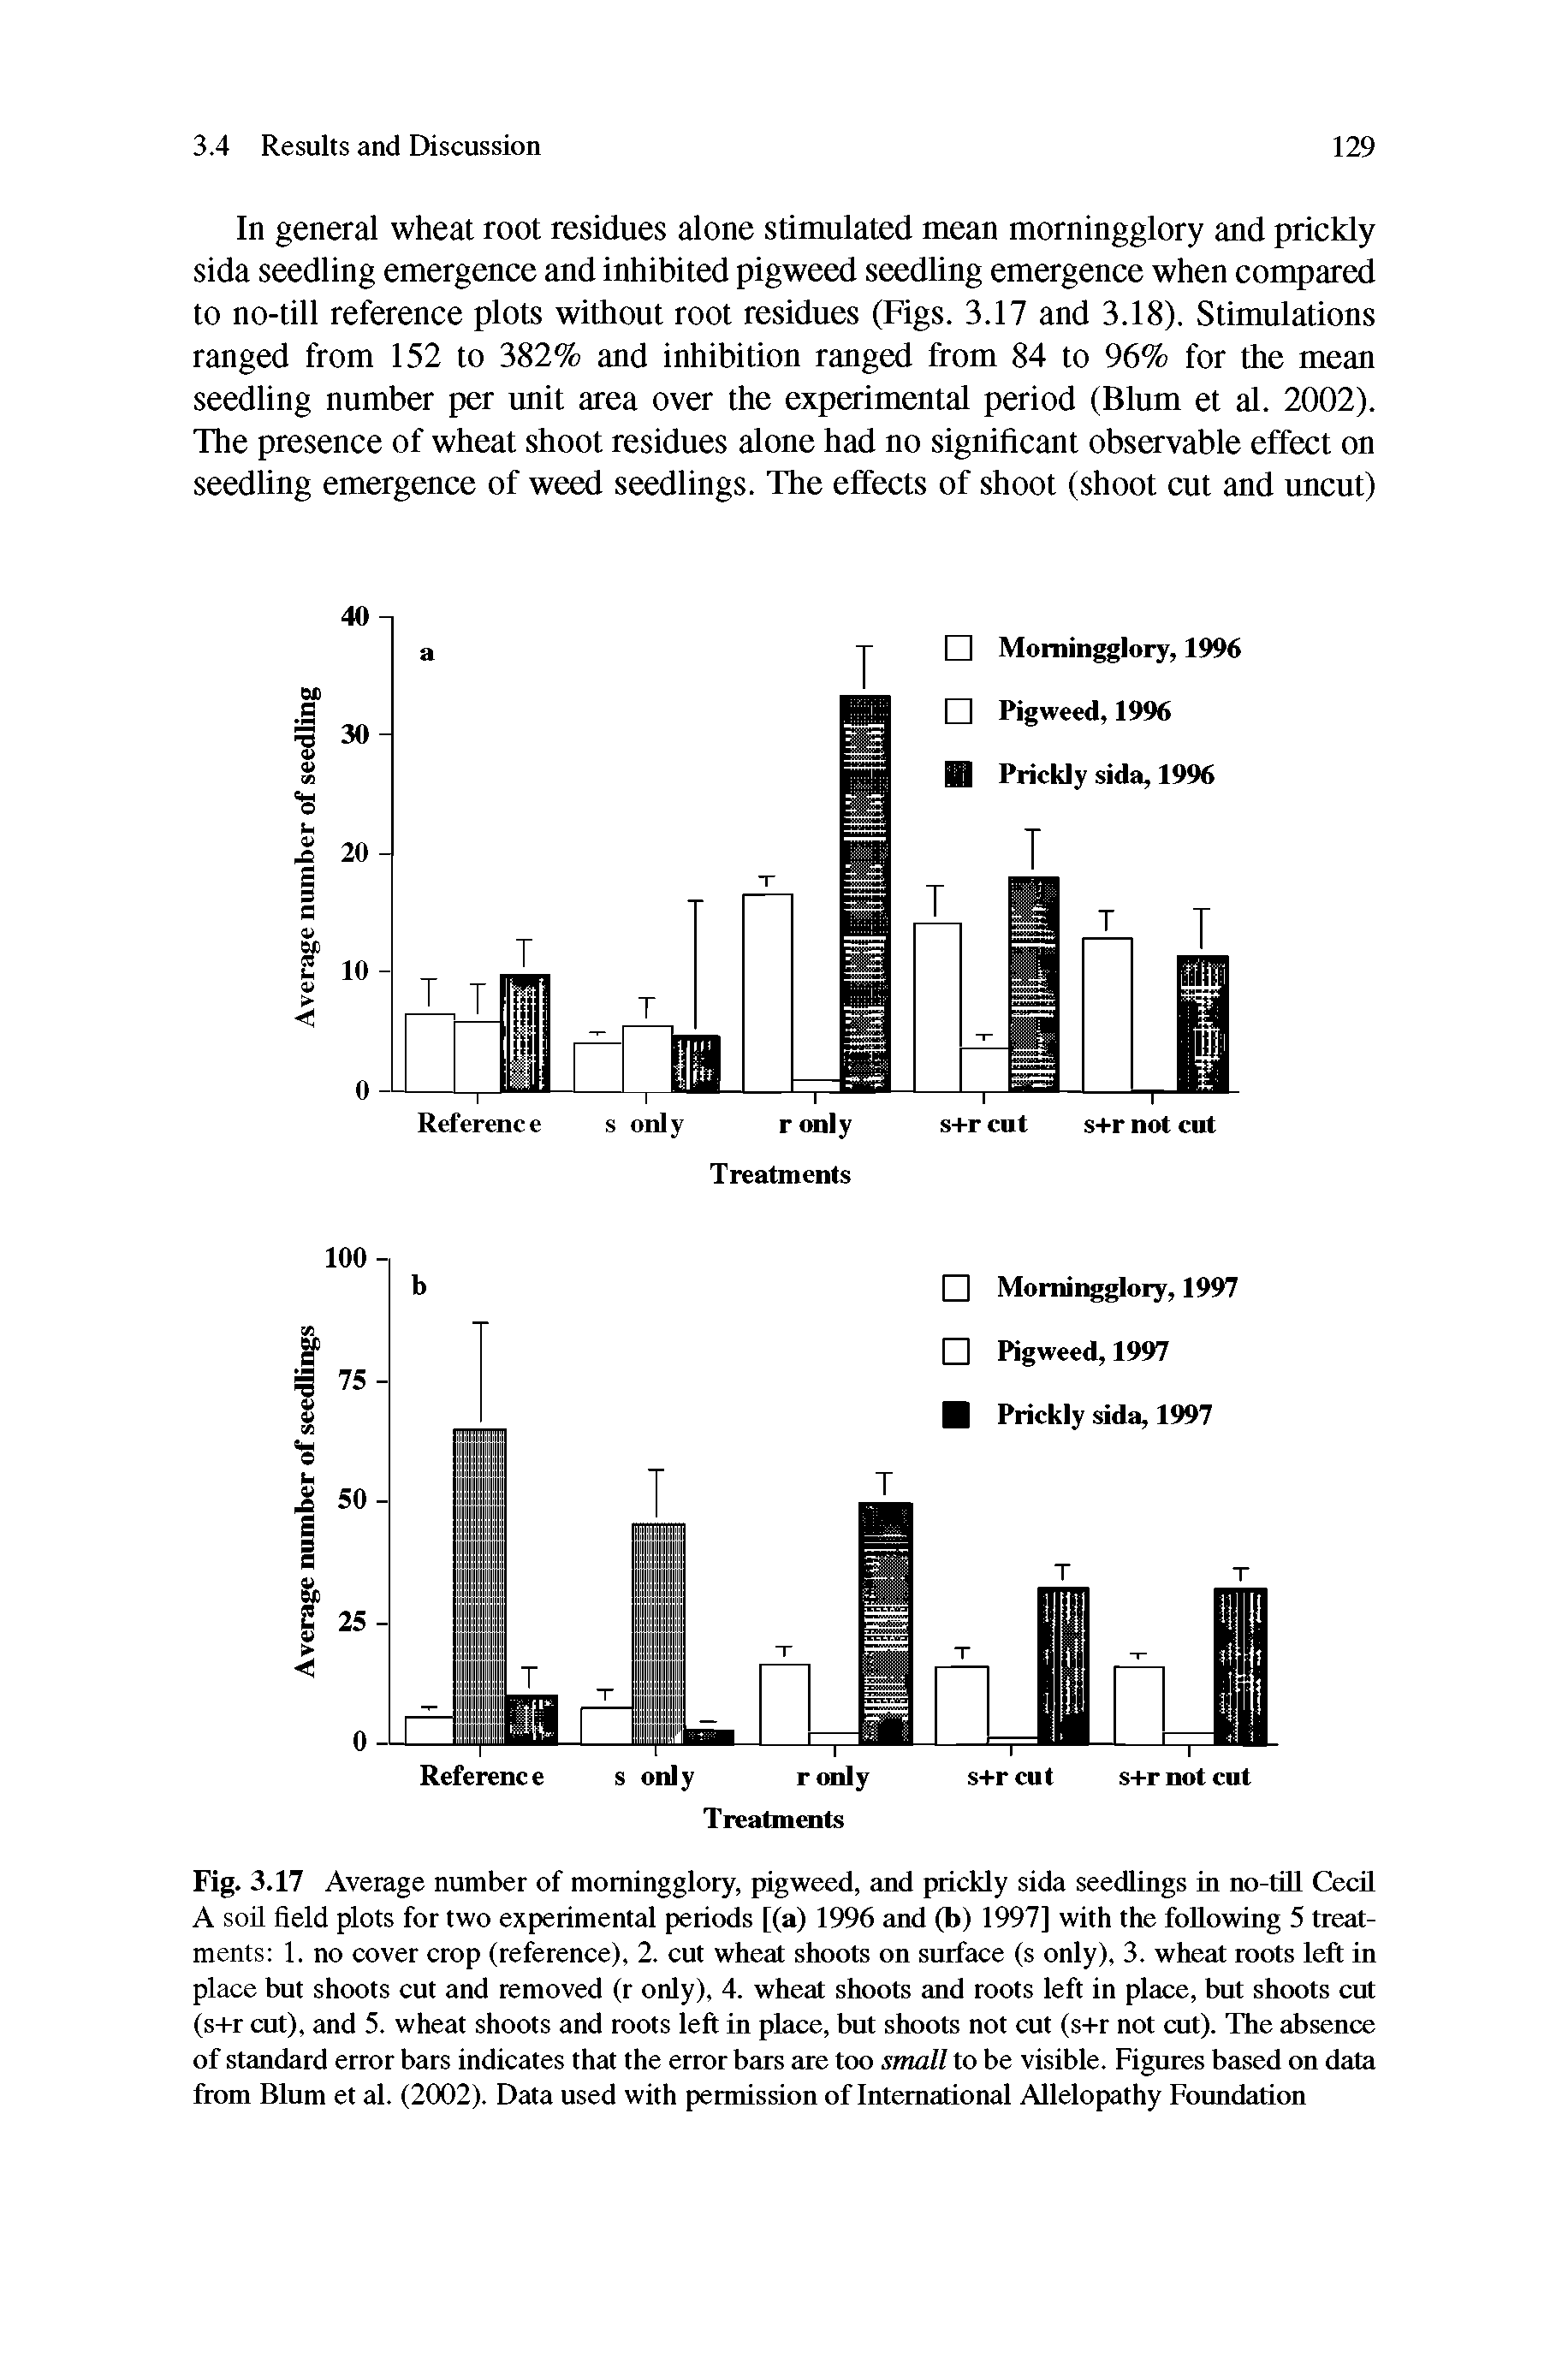 Fig. 3.17 Average number of morningglory, pigweed, and prickly sida seedlings in no-tiU Cecil A soil field plots for two experimented periods [(a) 1996 and (b) 1997] with the following 5 treatments 1. no cover crop (reference), 2. cut wheat shoots on surface (s only), 3. wheat roots left in place but shoots cut and removed (r only), 4. wheat shoots and roots left in place, but shoots cut (s+r cut), and 5. wheat shoots and roots left in place, but shoots not cut (s+r not cut). The absence of standard error bars indicates that the error bars are too small to be visible. Figures based on data from Blum et al. (2002). Data used with permission of International Allelopathy Foundation...